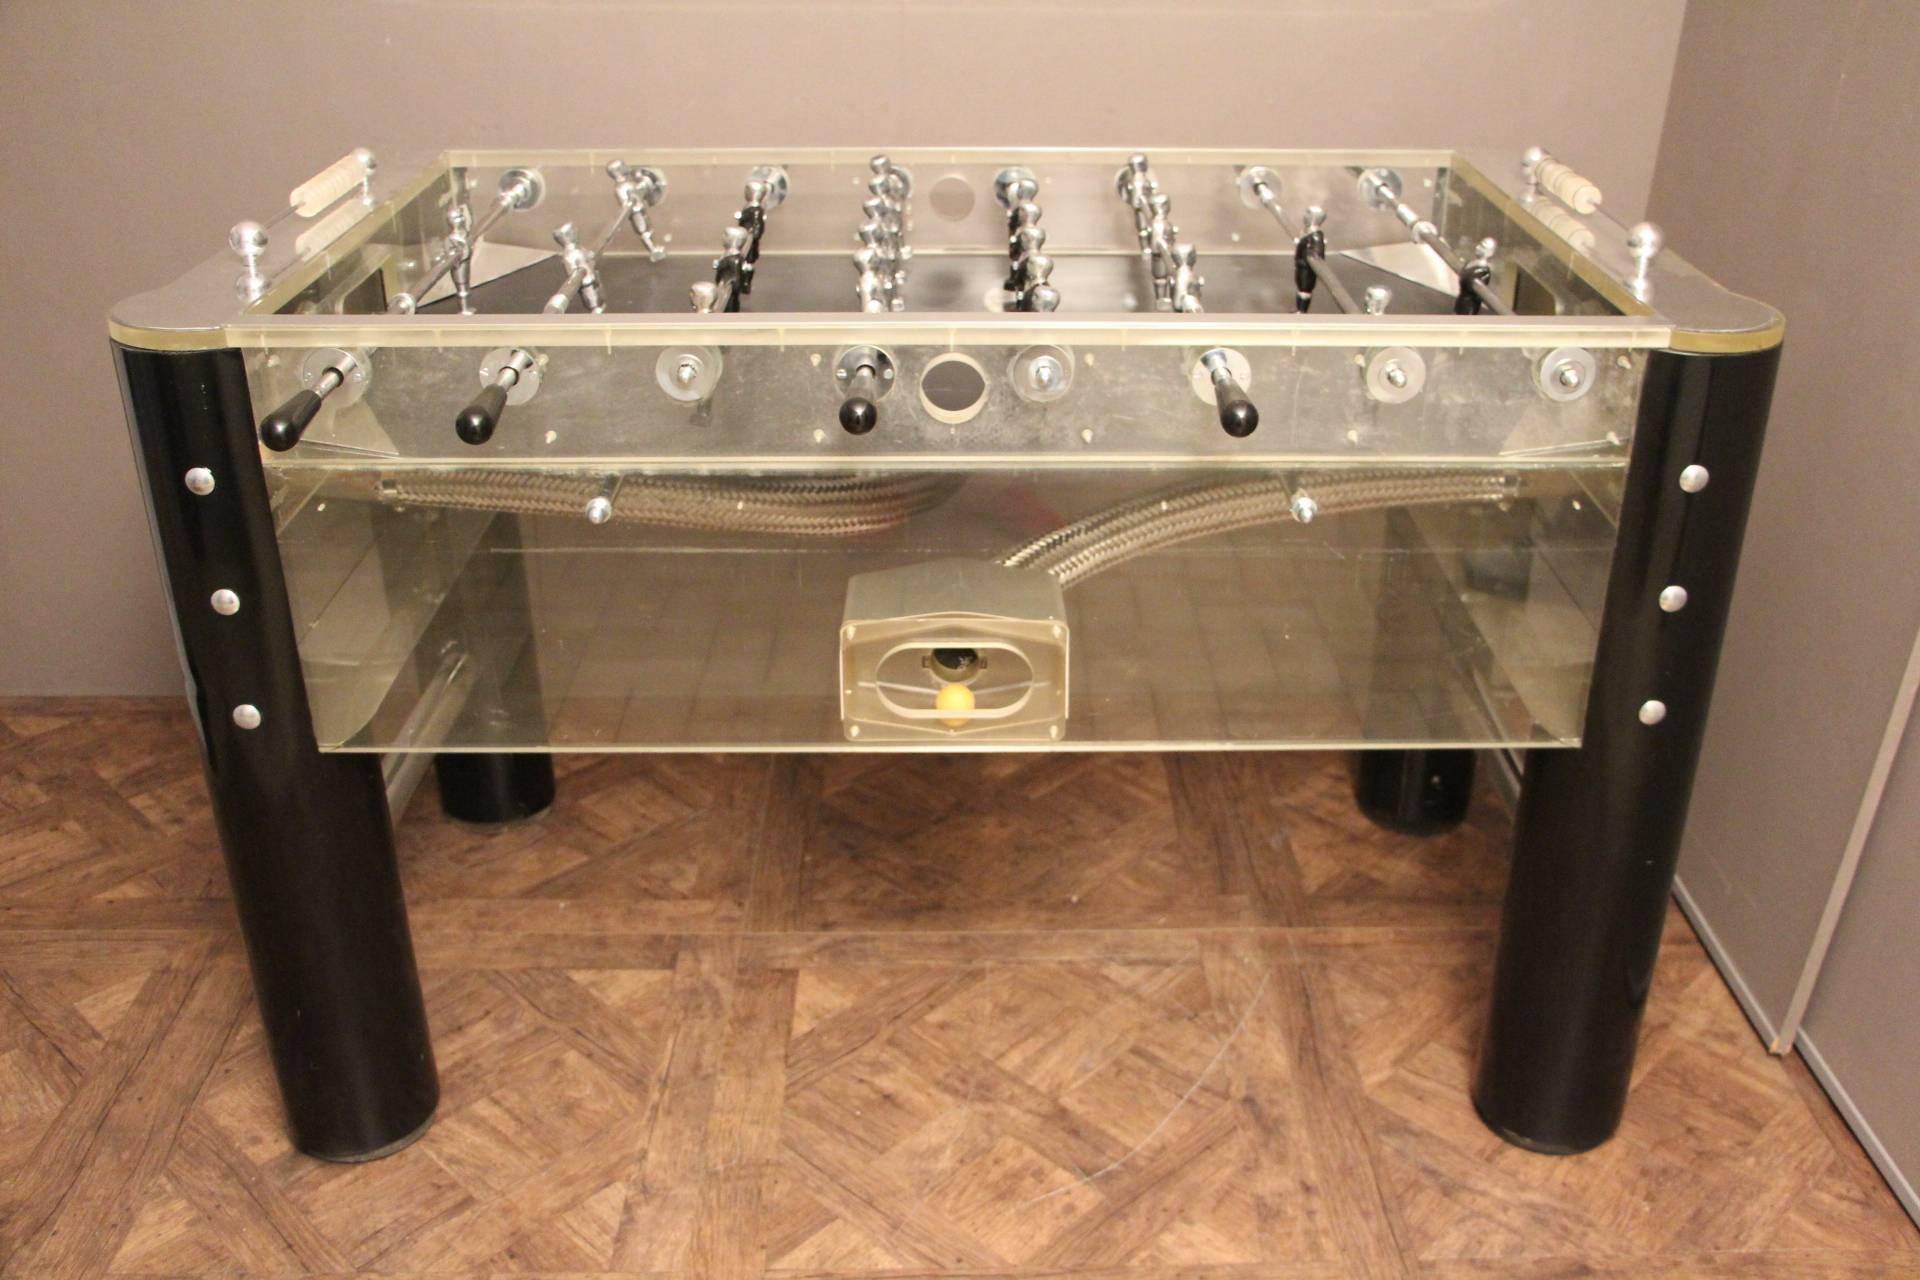 This spectacular and very unique foosball table made in 1970s features all Lucite, mirror polished aluminum sides, black wooden legs and black and polished silver players.
Black playground. All polished aluminum rods, smoothly sliding.
Perfect